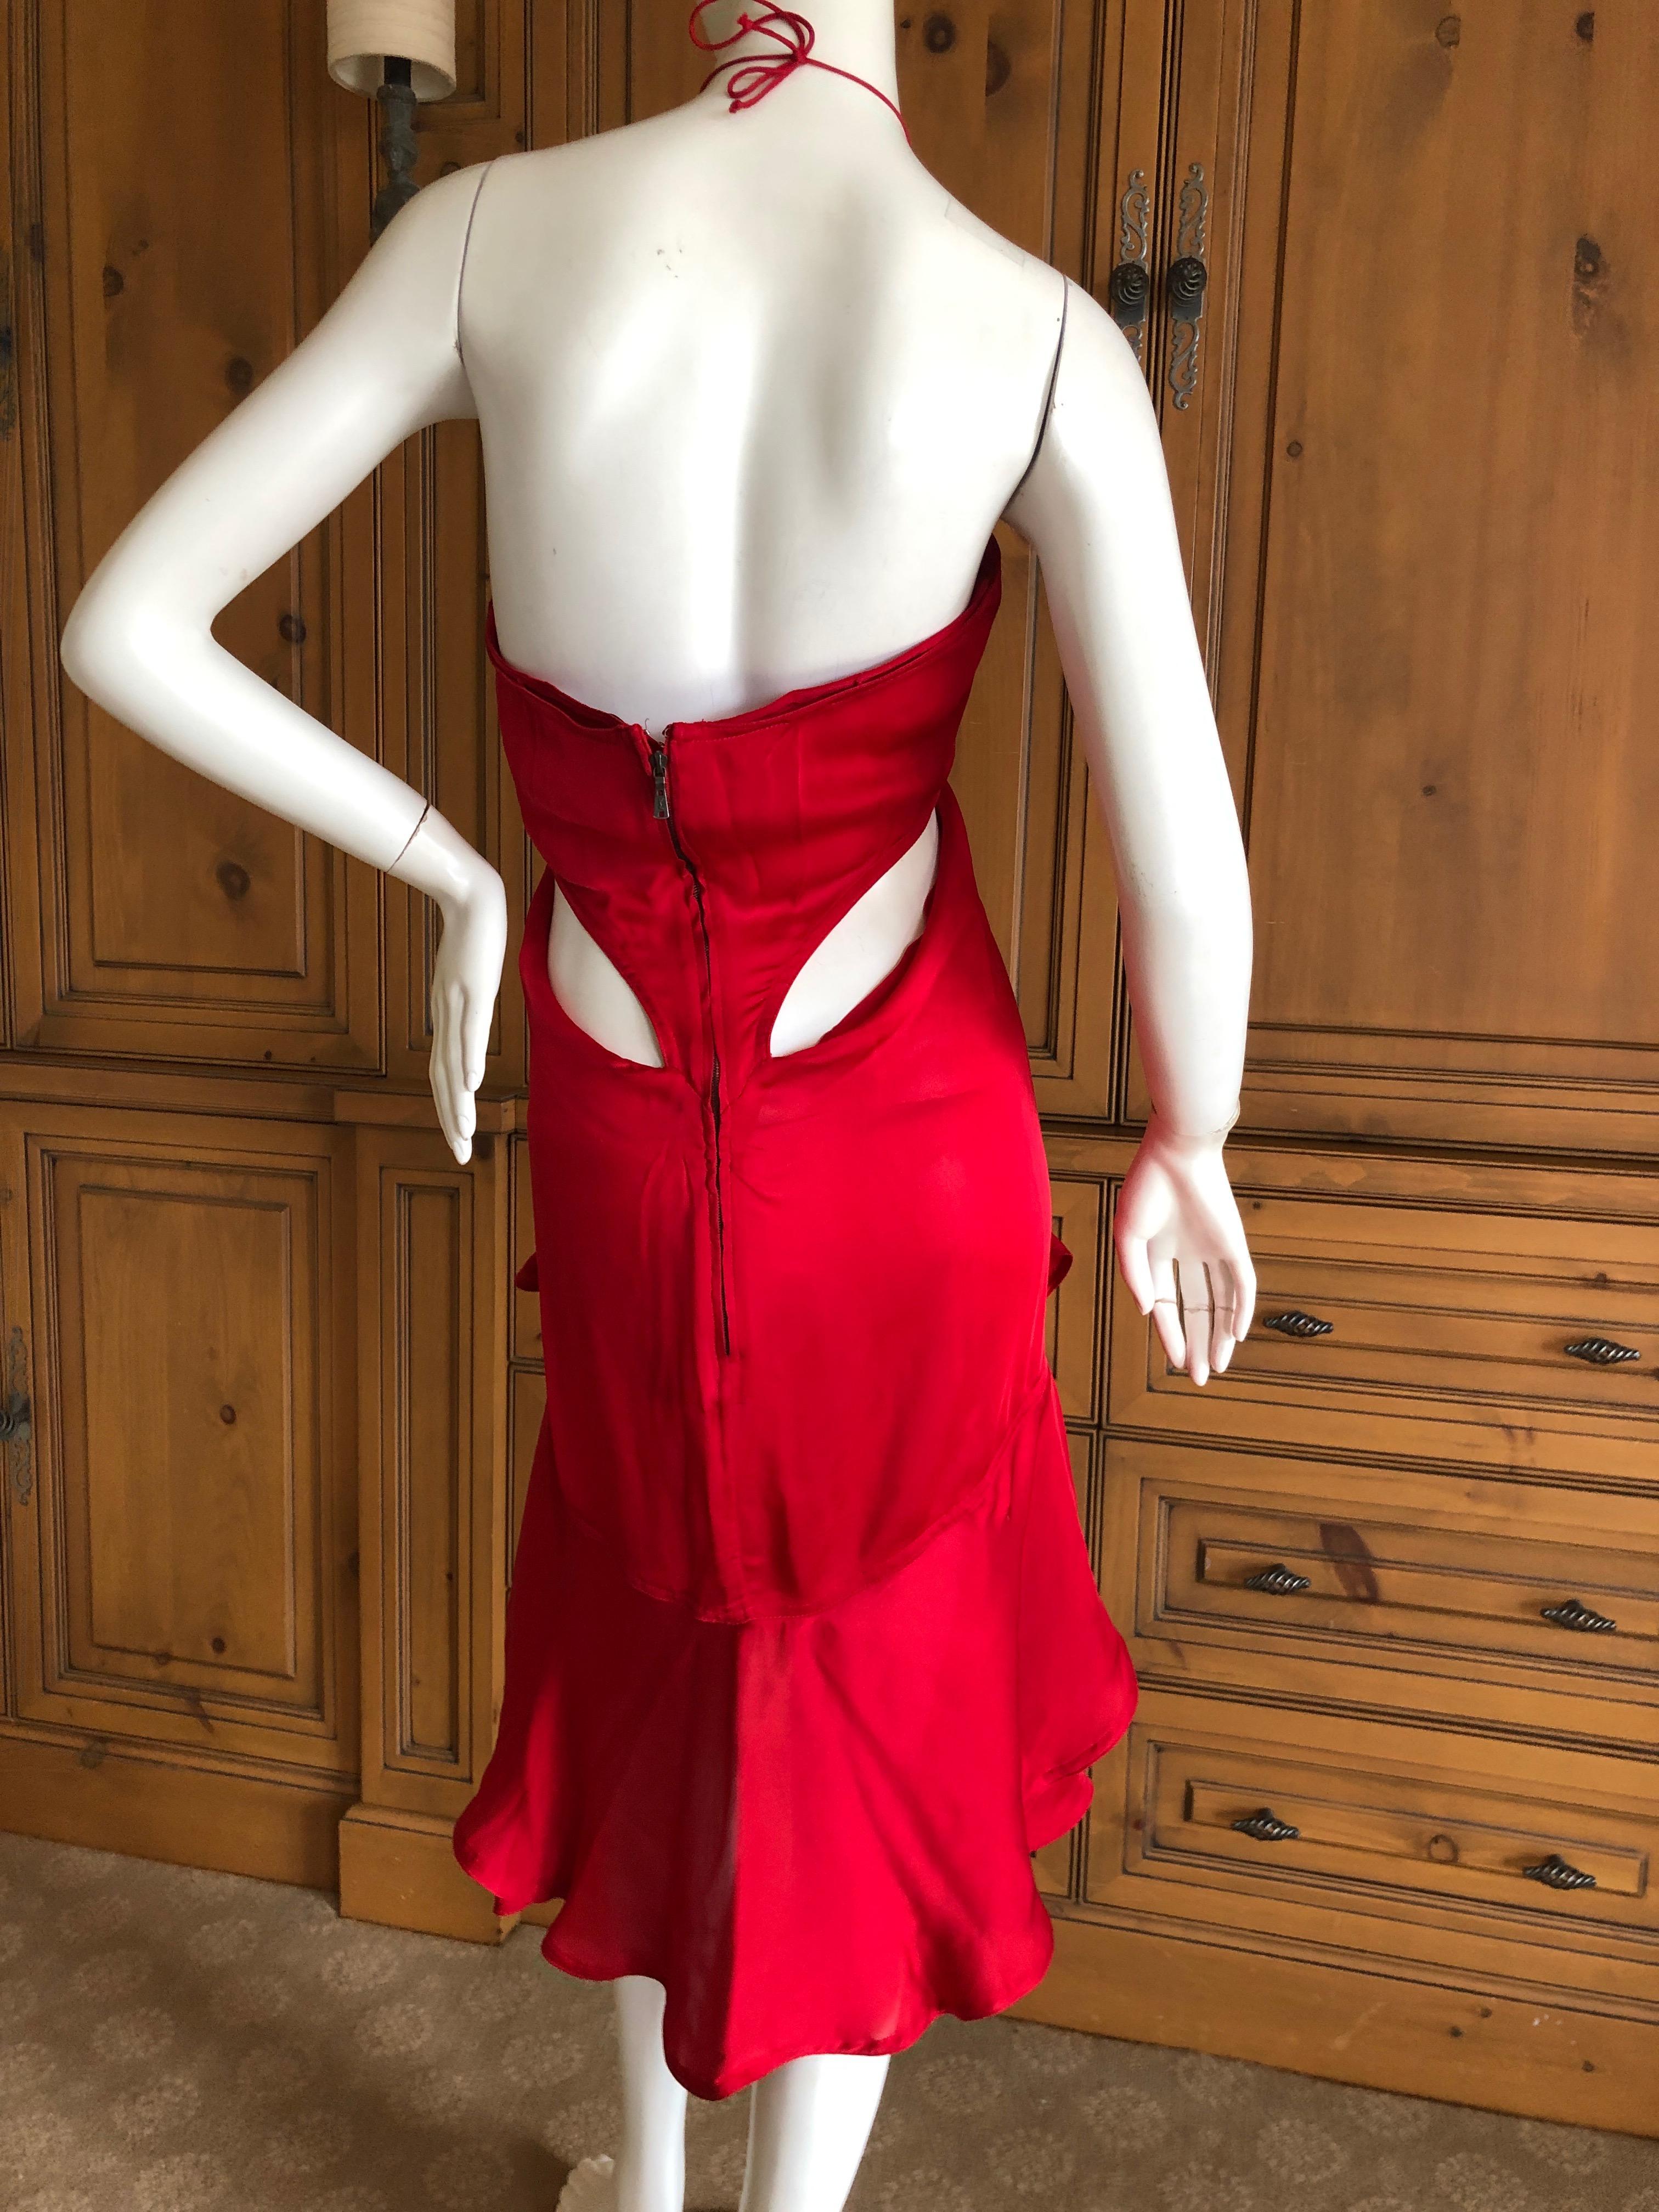 Yves Saint Laurent by Tom Ford 2003 Ruffled Red Silk Dress Size 40 For Sale 2